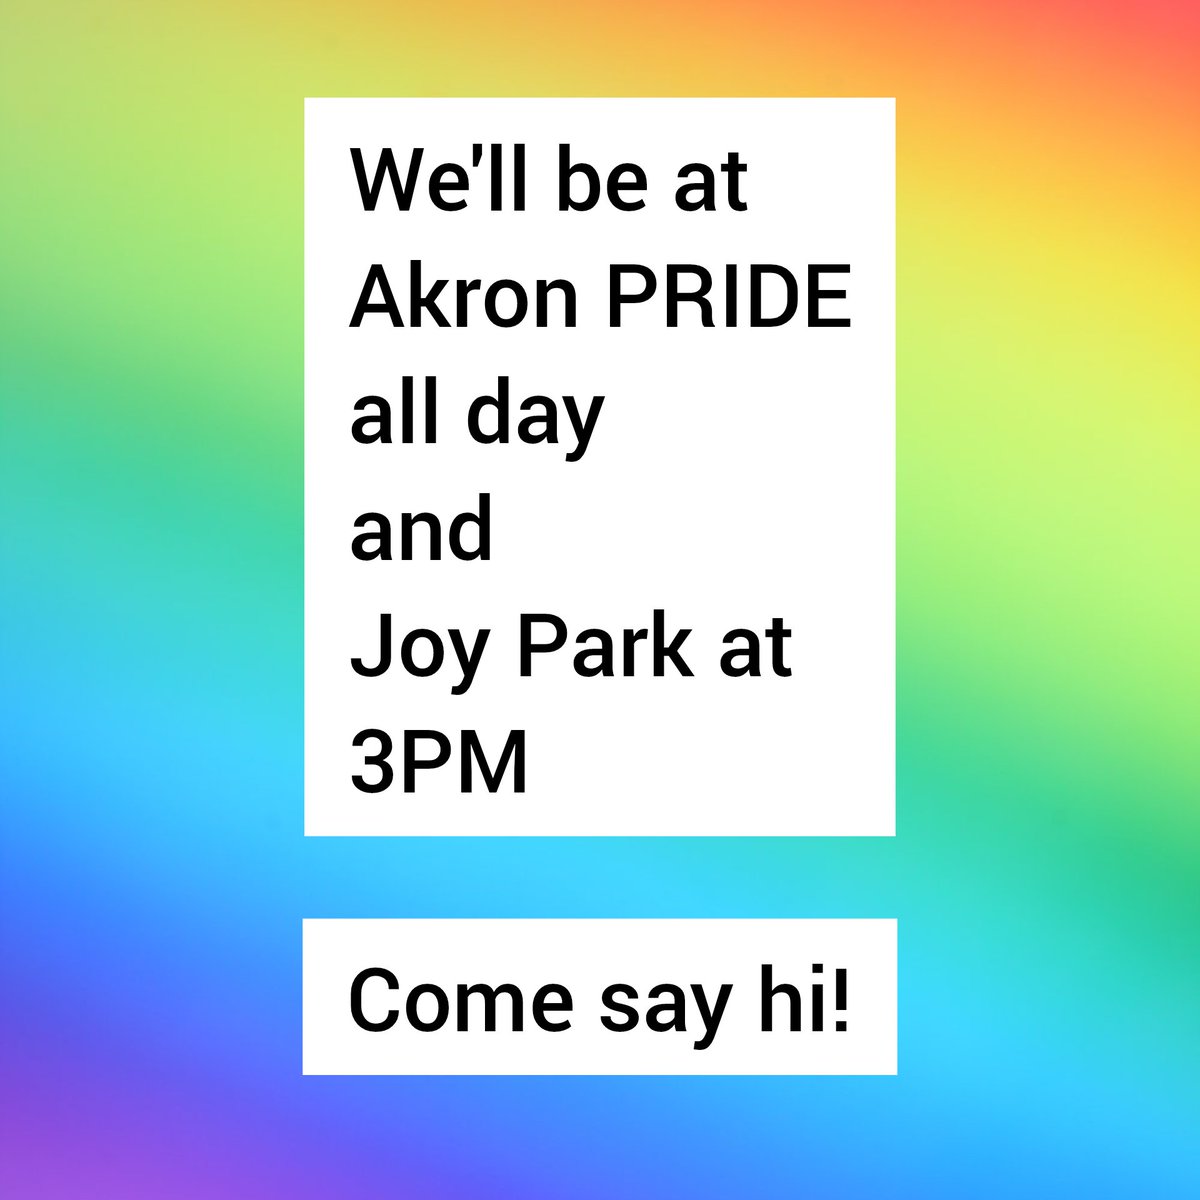 Got free time today? ✨

Stop by our table at Akron PRIDE and say hi! 🏳️‍⚧️🏳️‍🌈

Also join us at Joy Park at 3PM with @thefreedombloc for the second to last day of the Week of Action! ✊

#Akron #Ohio #HeyAkron #Pride #AkronPride #keepakronbeautiful #KeepAkronGay #AllPowerToThePeople